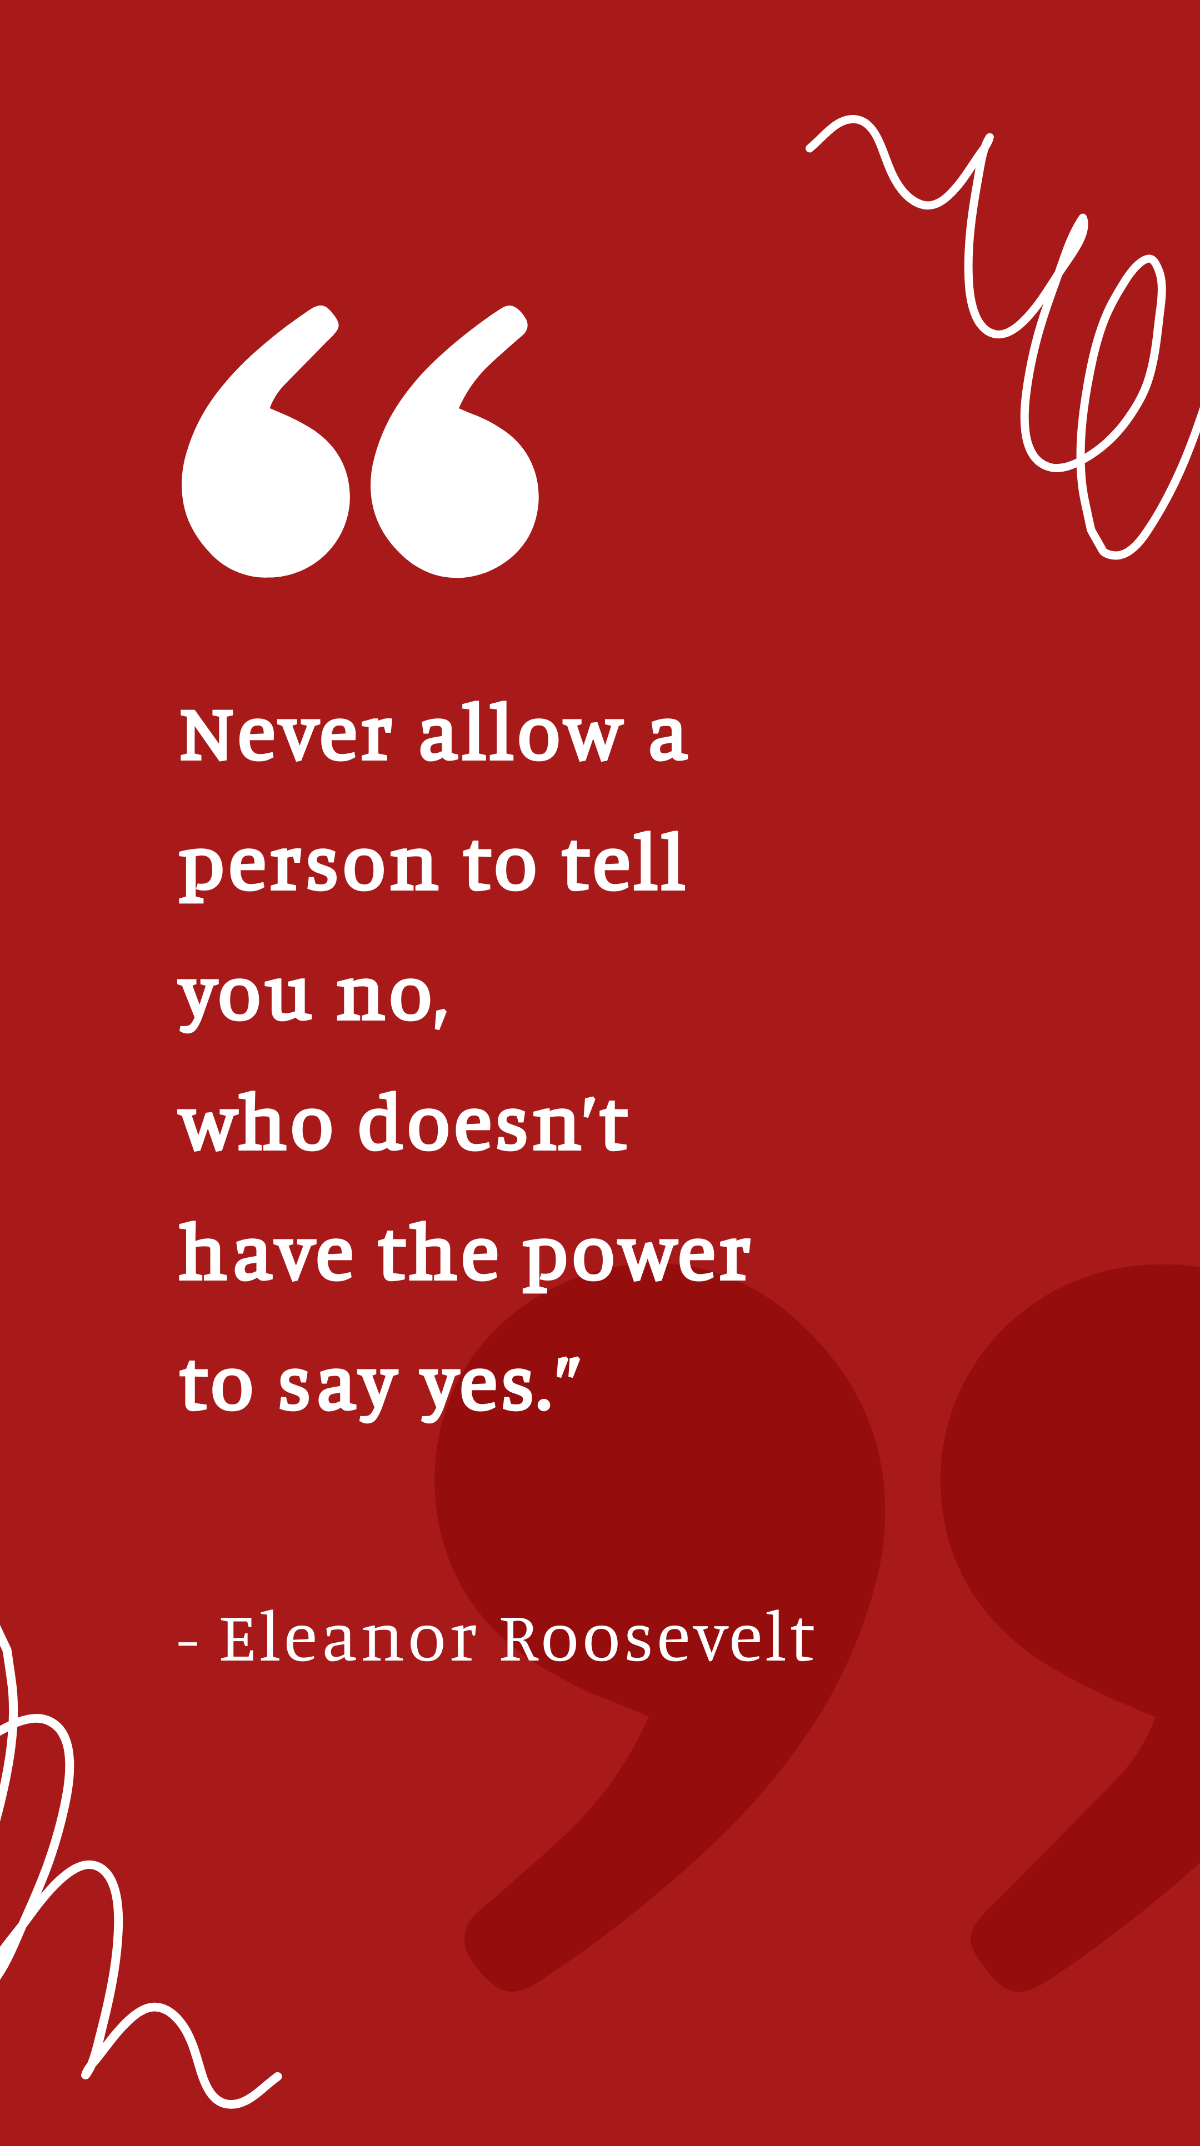 Eleanor Roosevelt - “Never allow a person to tell you no, who doesn’t have the power to say yes.” Template